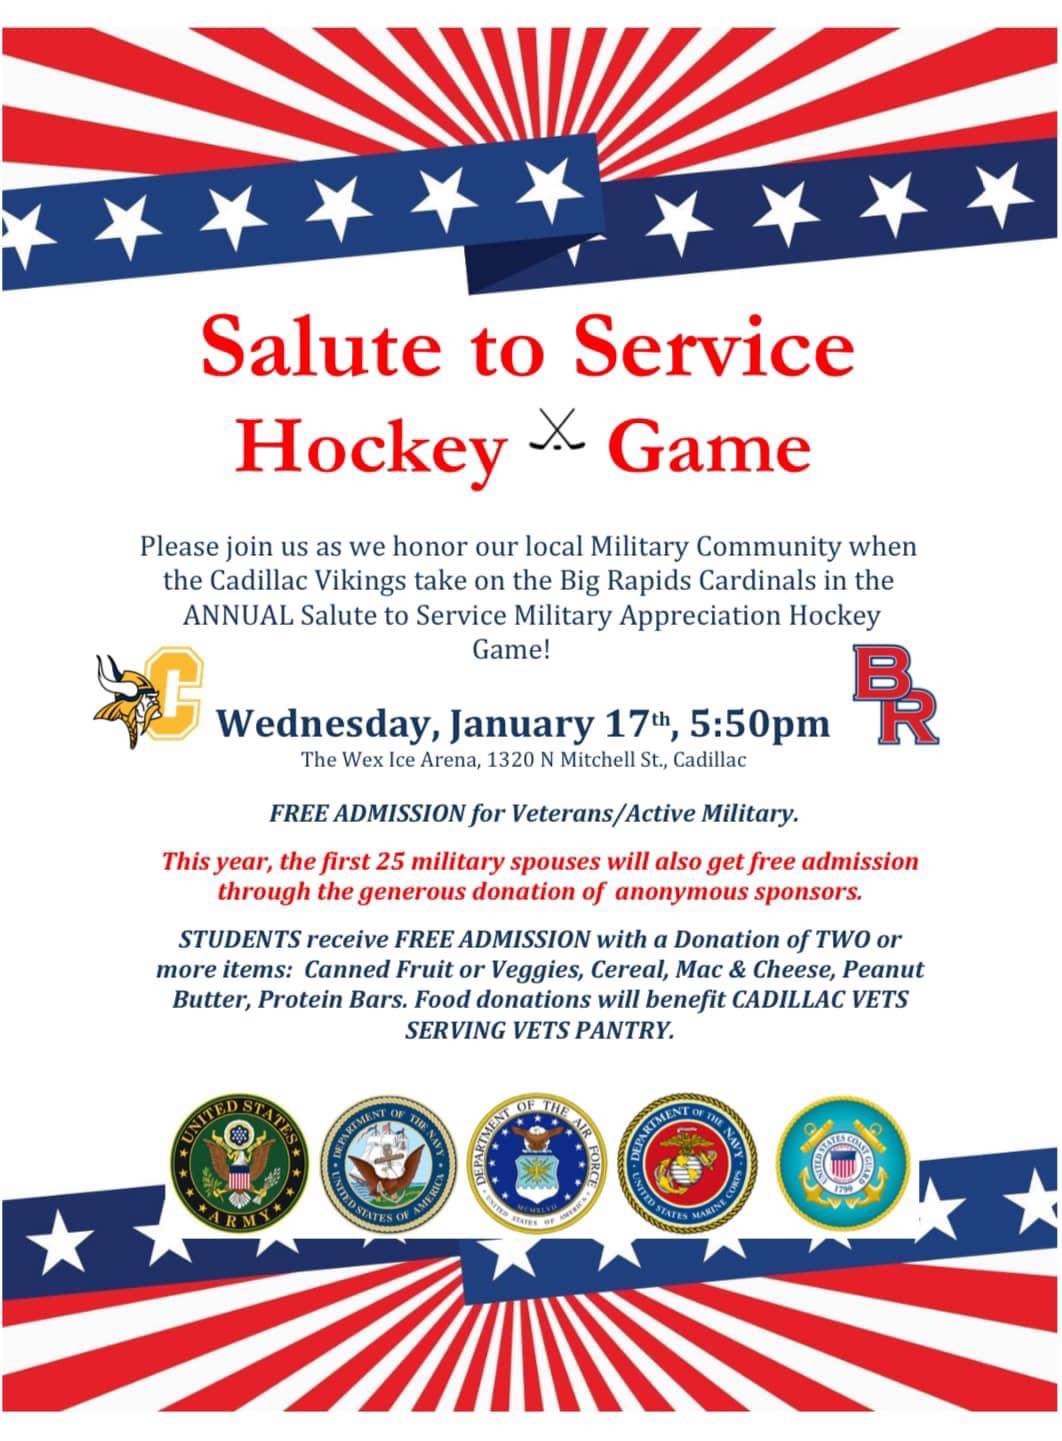 Veterans get in free at Cadillac ‘Salute to Service’ hockey game